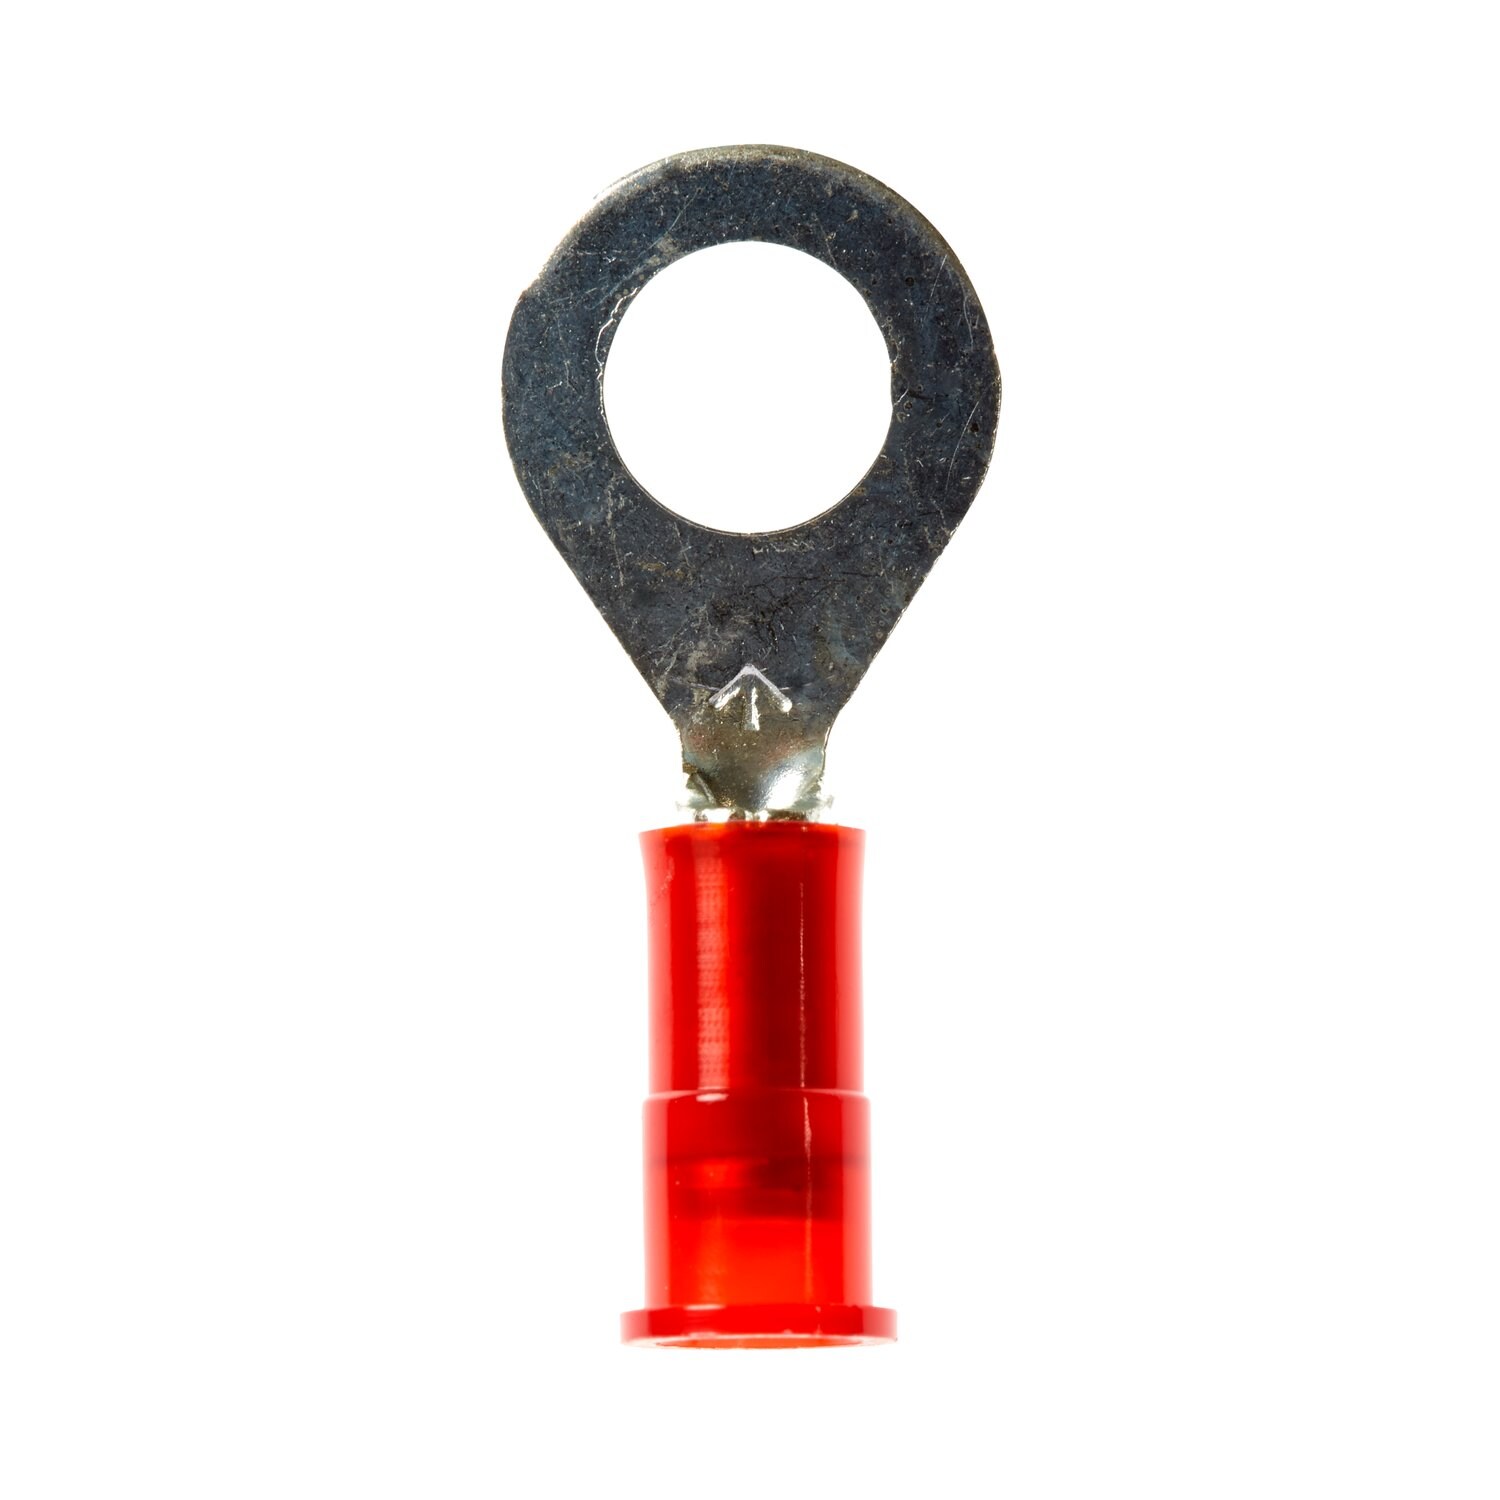 7100163930 - 3M Scotchlok Ring Tongue, Nylon Insulated w/Insulation Grip
MNG18-14R/SK, Stud Size 1/4, 1000/Case